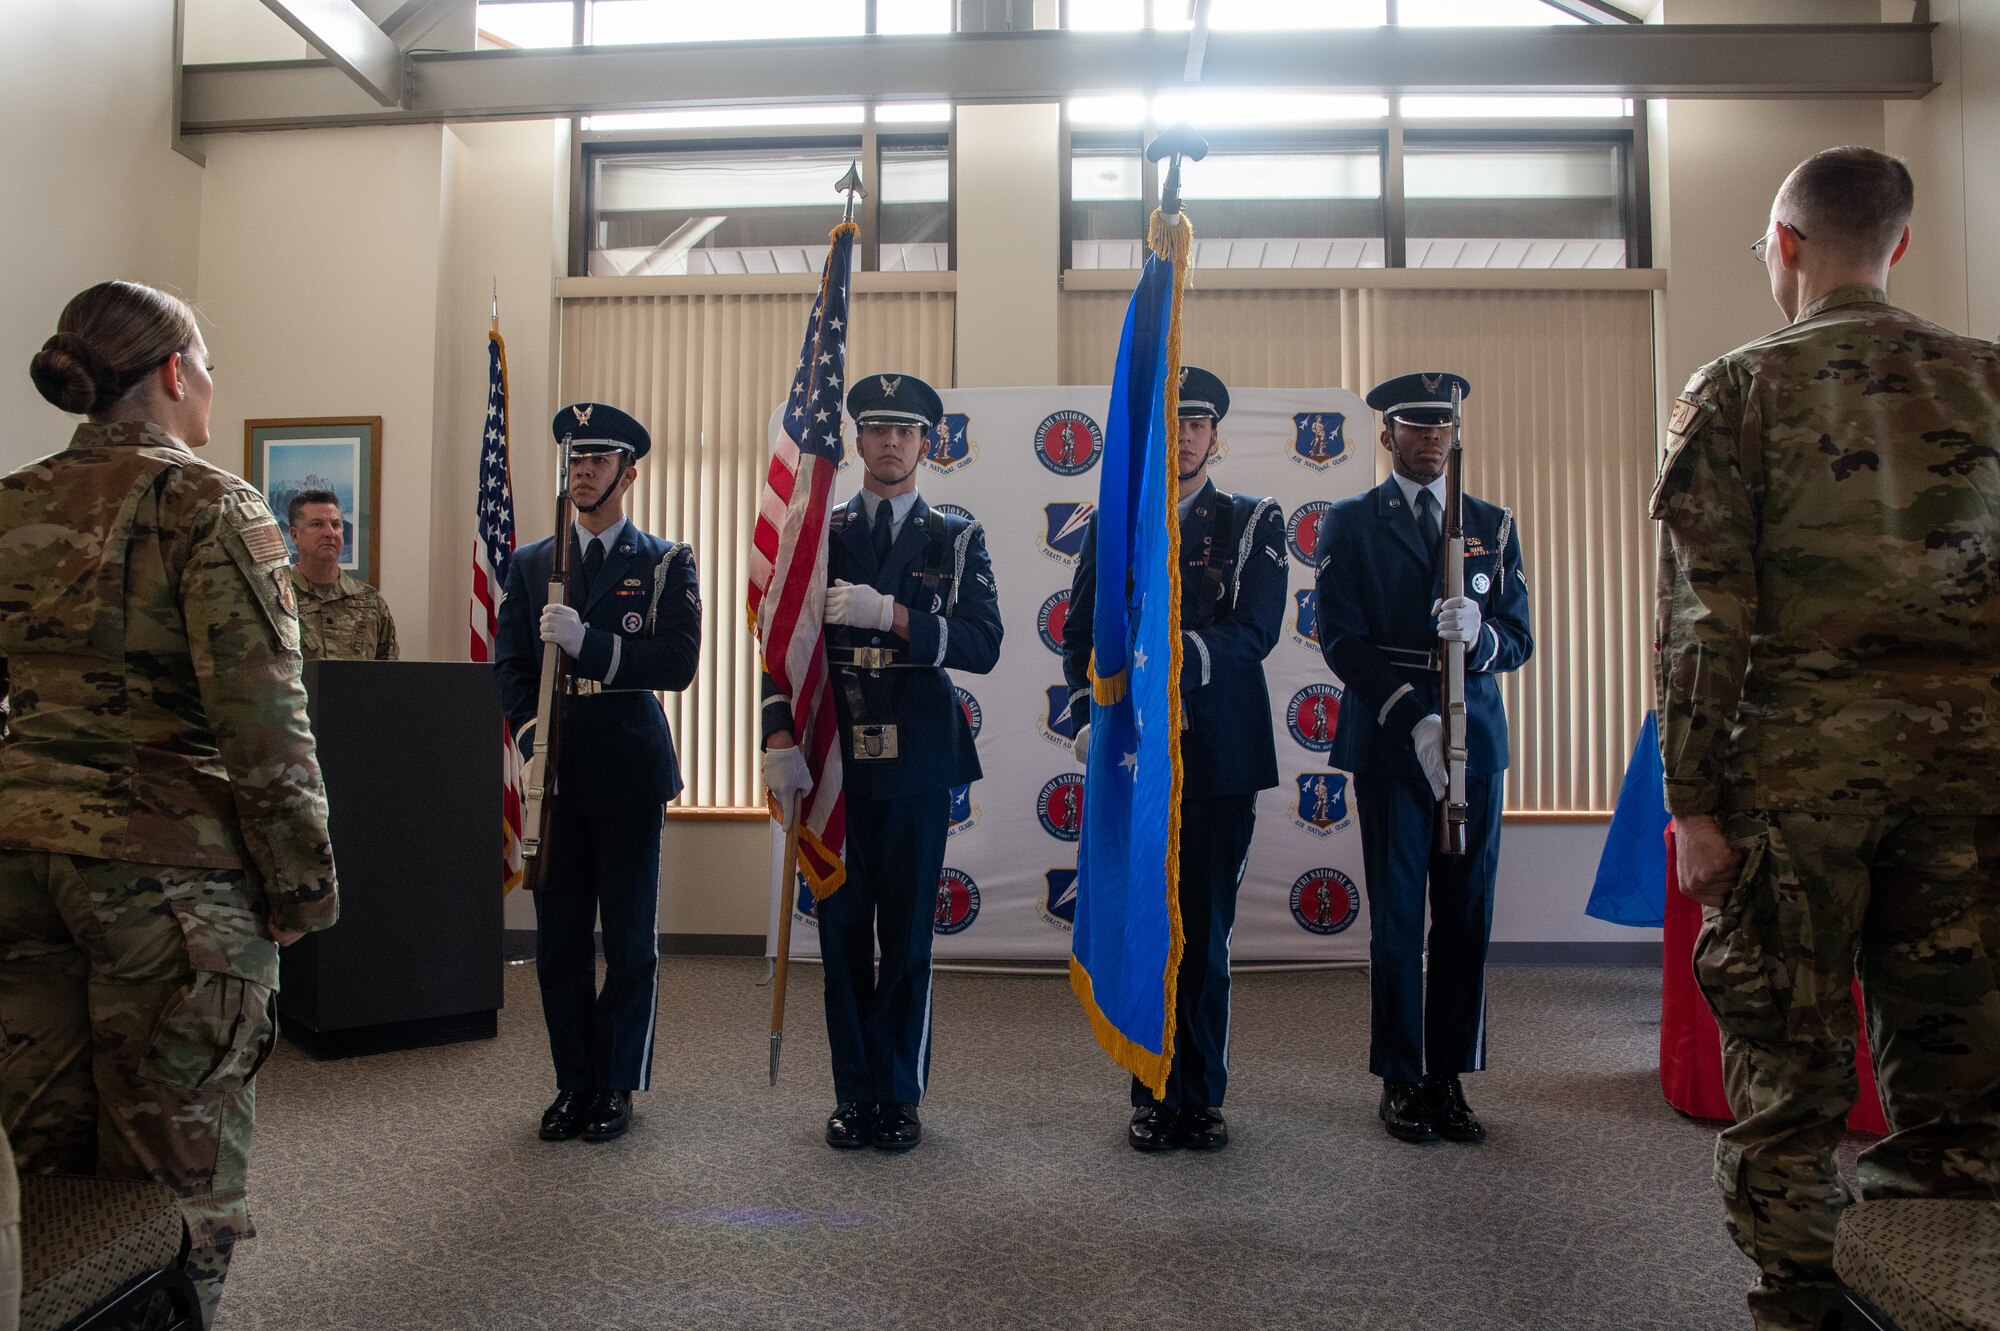 The Whiteman Air Force Base Honor Guard presents the colors during the national anthem at a senior noncommissioned officer induction ceremony at Knob Noster, Missouri, Jan. 8, 2023. Thirteen of the 131st Bomb Wing's newest master sergeants were inducted into the wing’s SNCO Corps.  (U.S. Air National Guard photo by Airman 1st Class Phoenix Lietch)